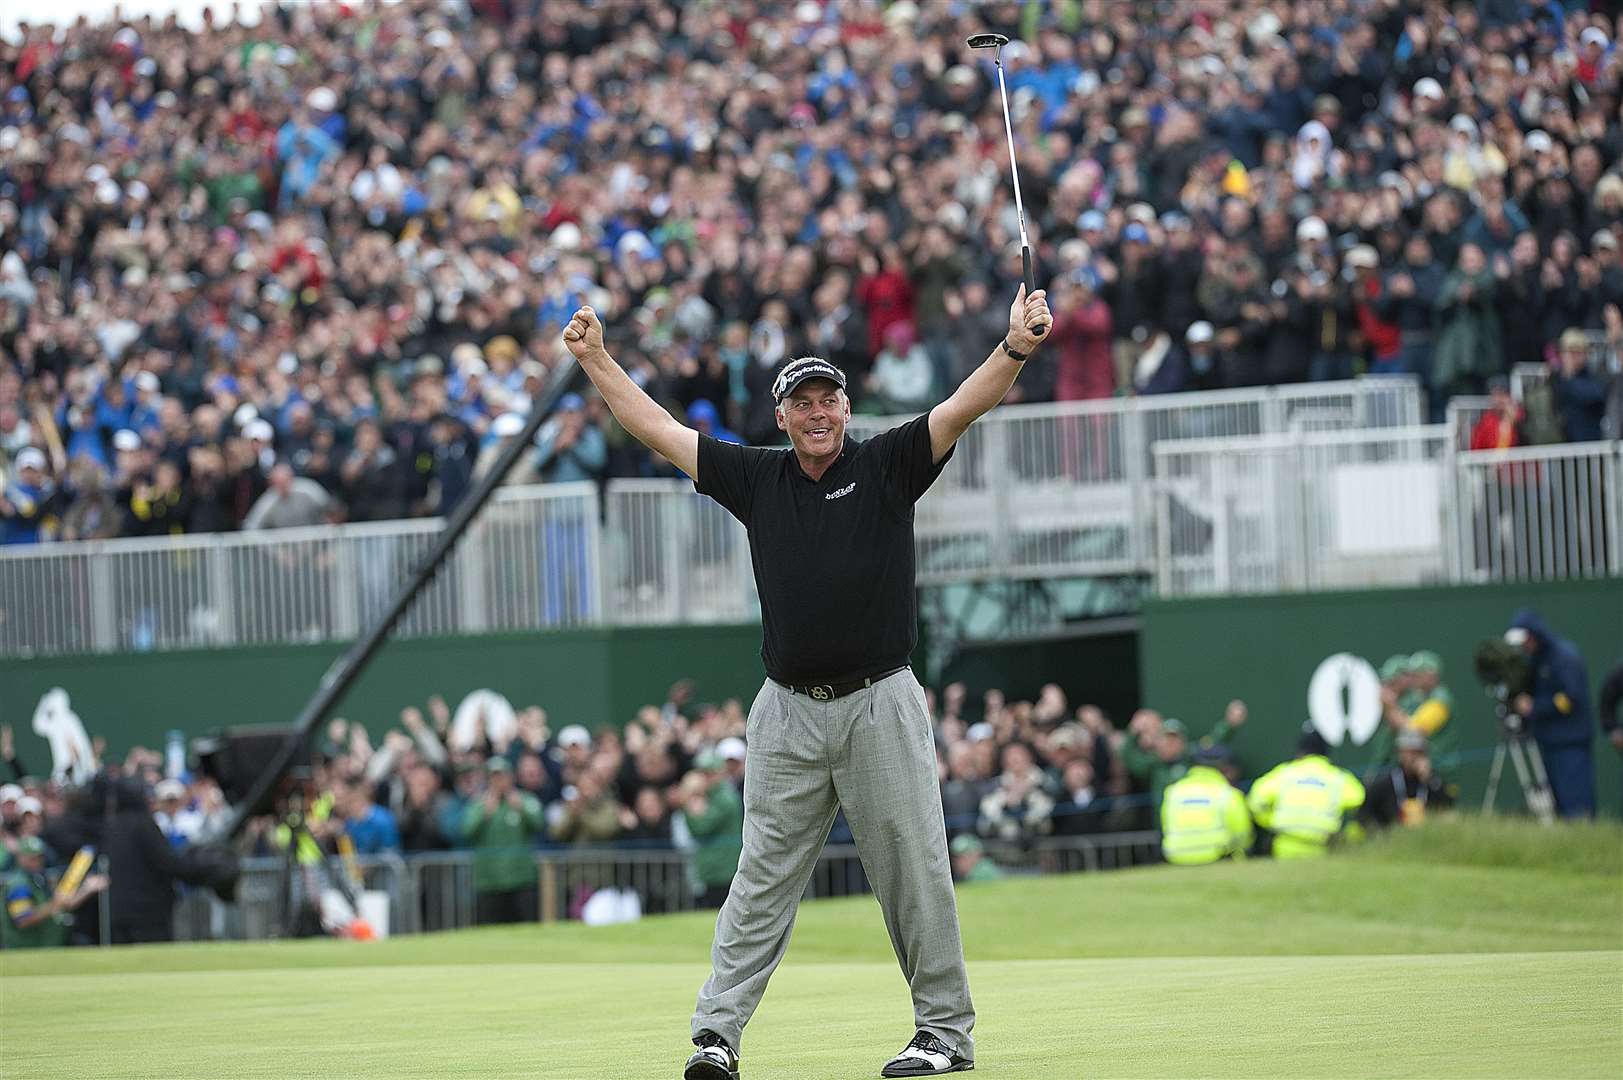 Darren Clarke wins The Open in 2011, the last time it was held at Royal St George's